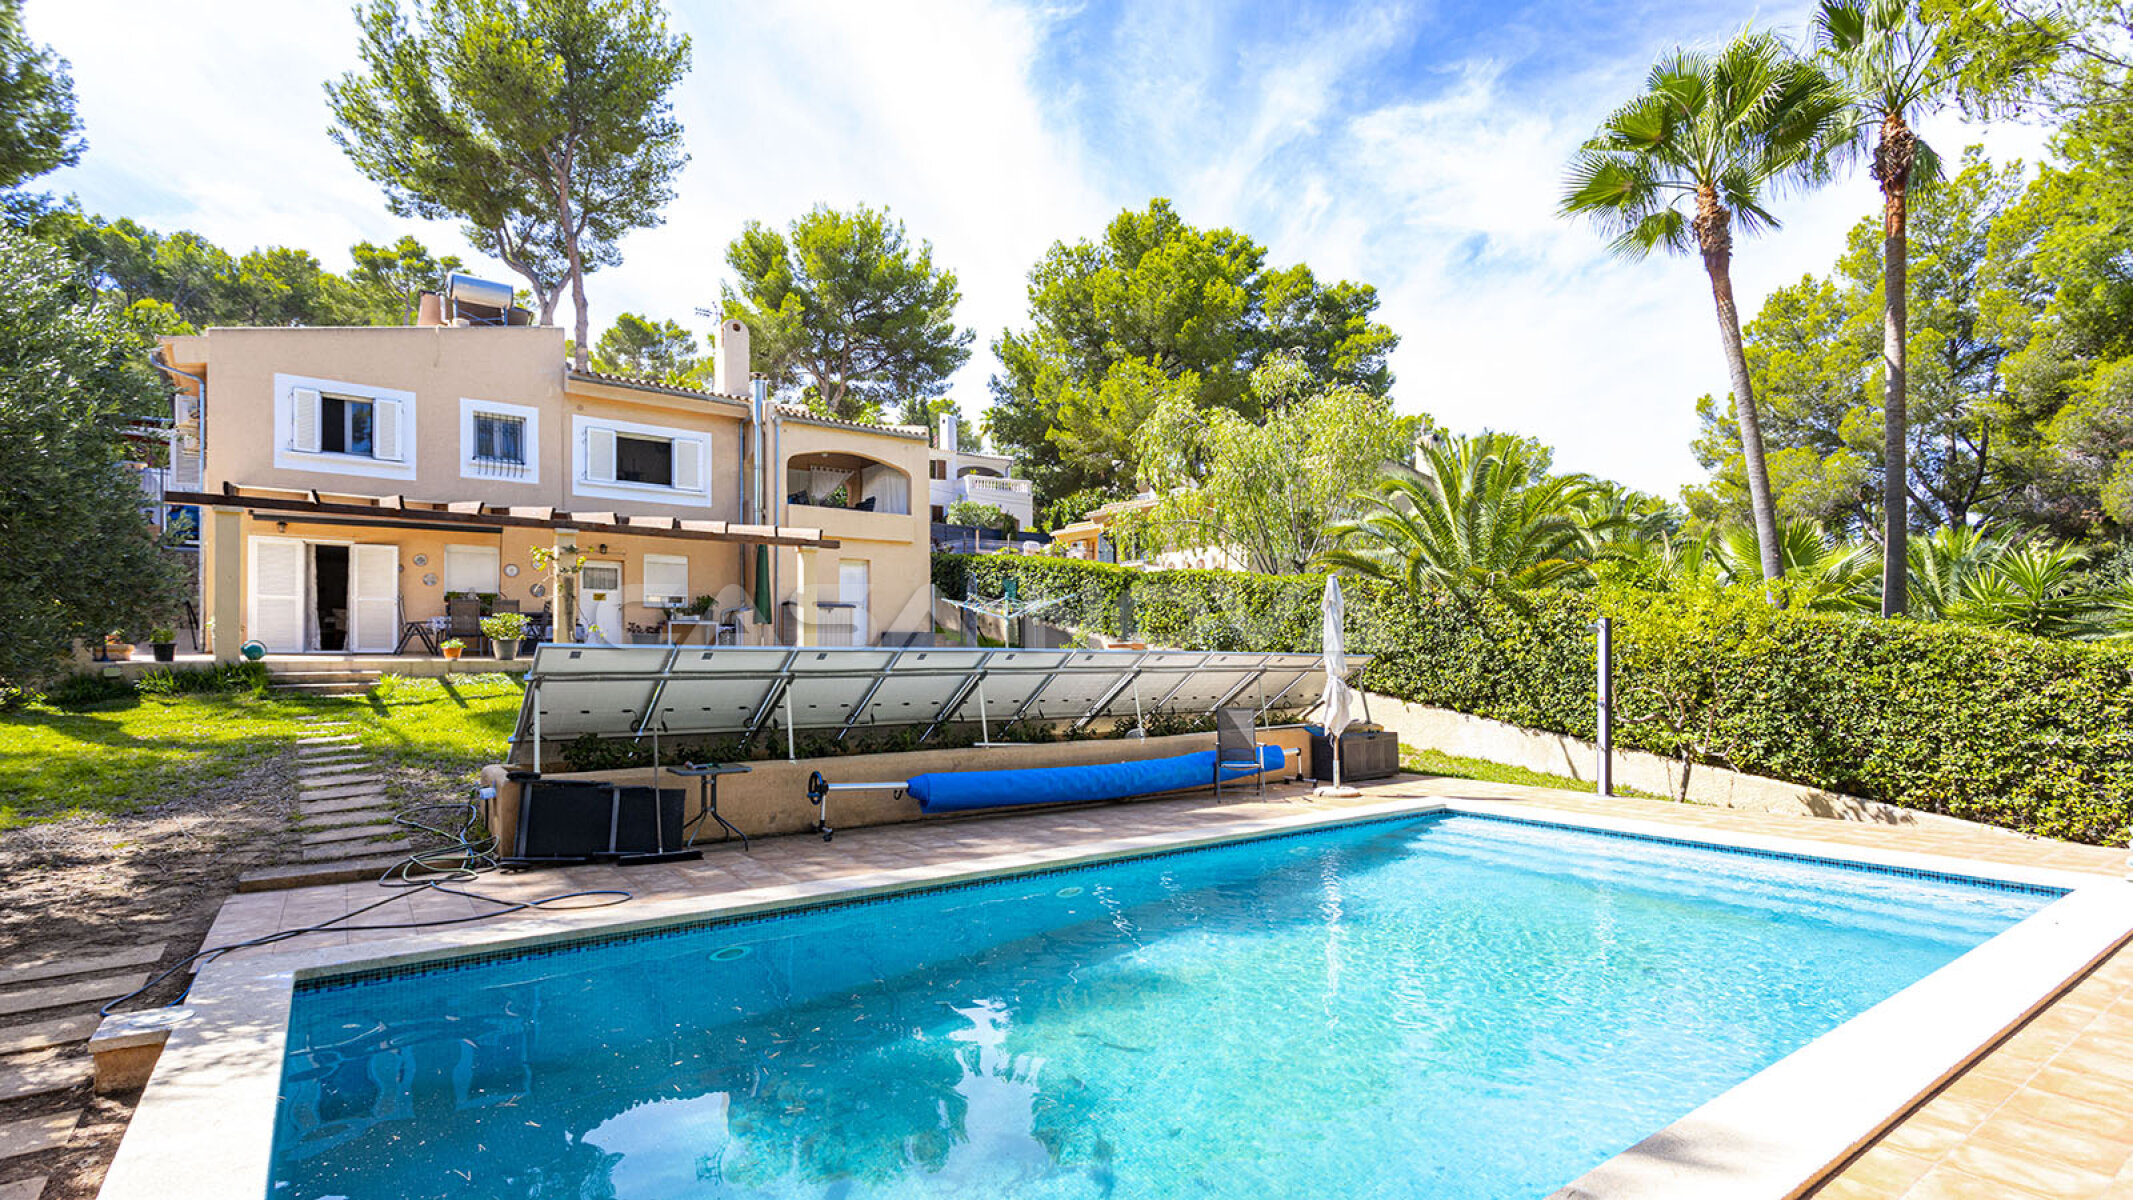 Mallorca Villa with guest appartment in quiet residential area